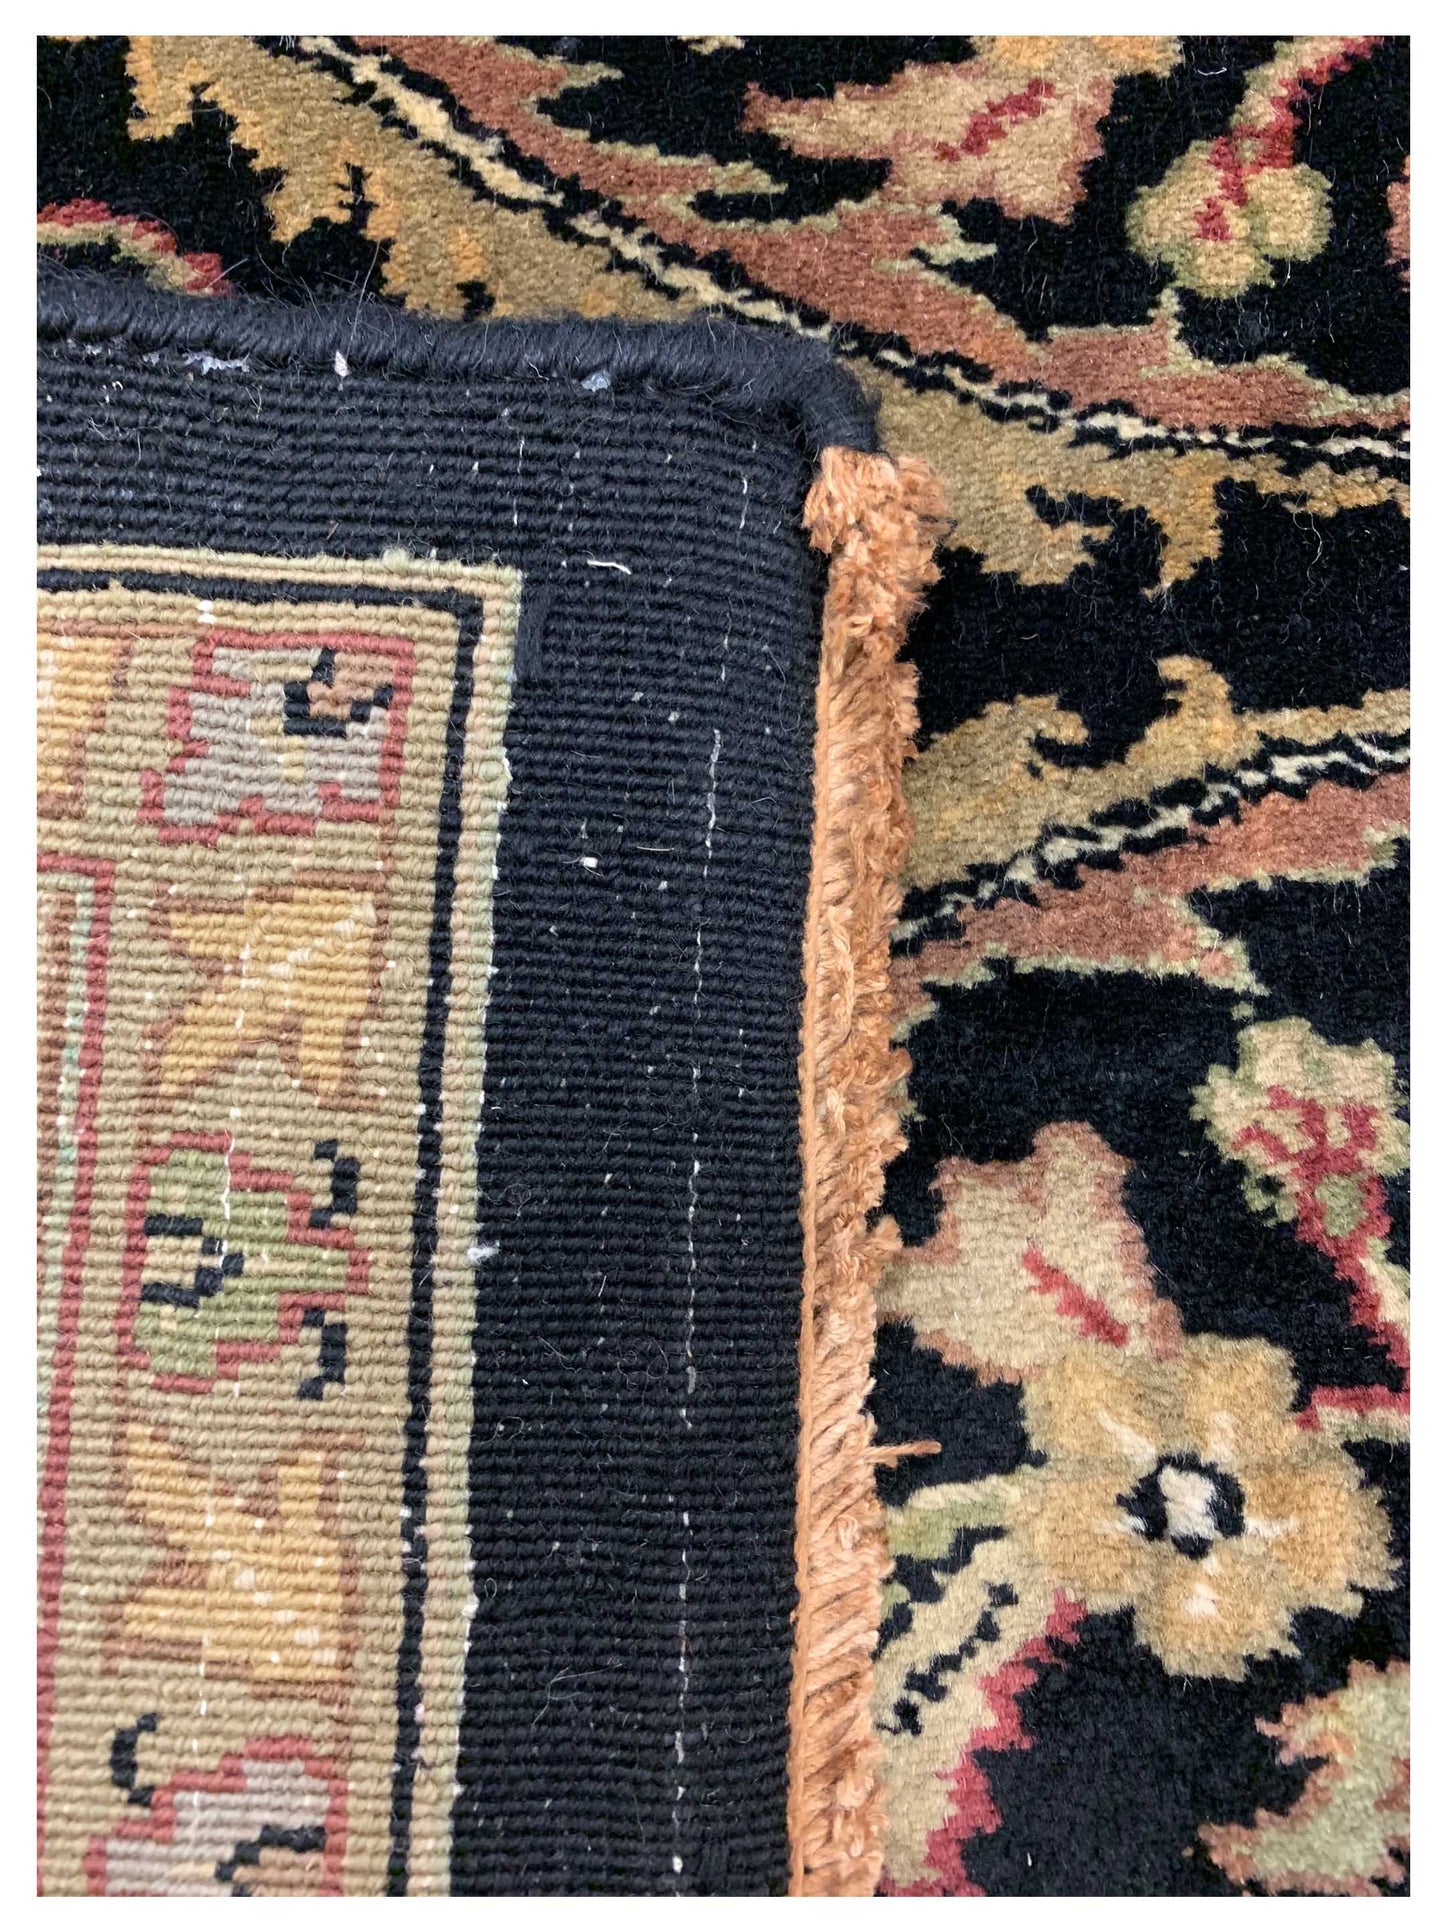 Artisan Michelle  Black Gold Traditional Knotted Rug